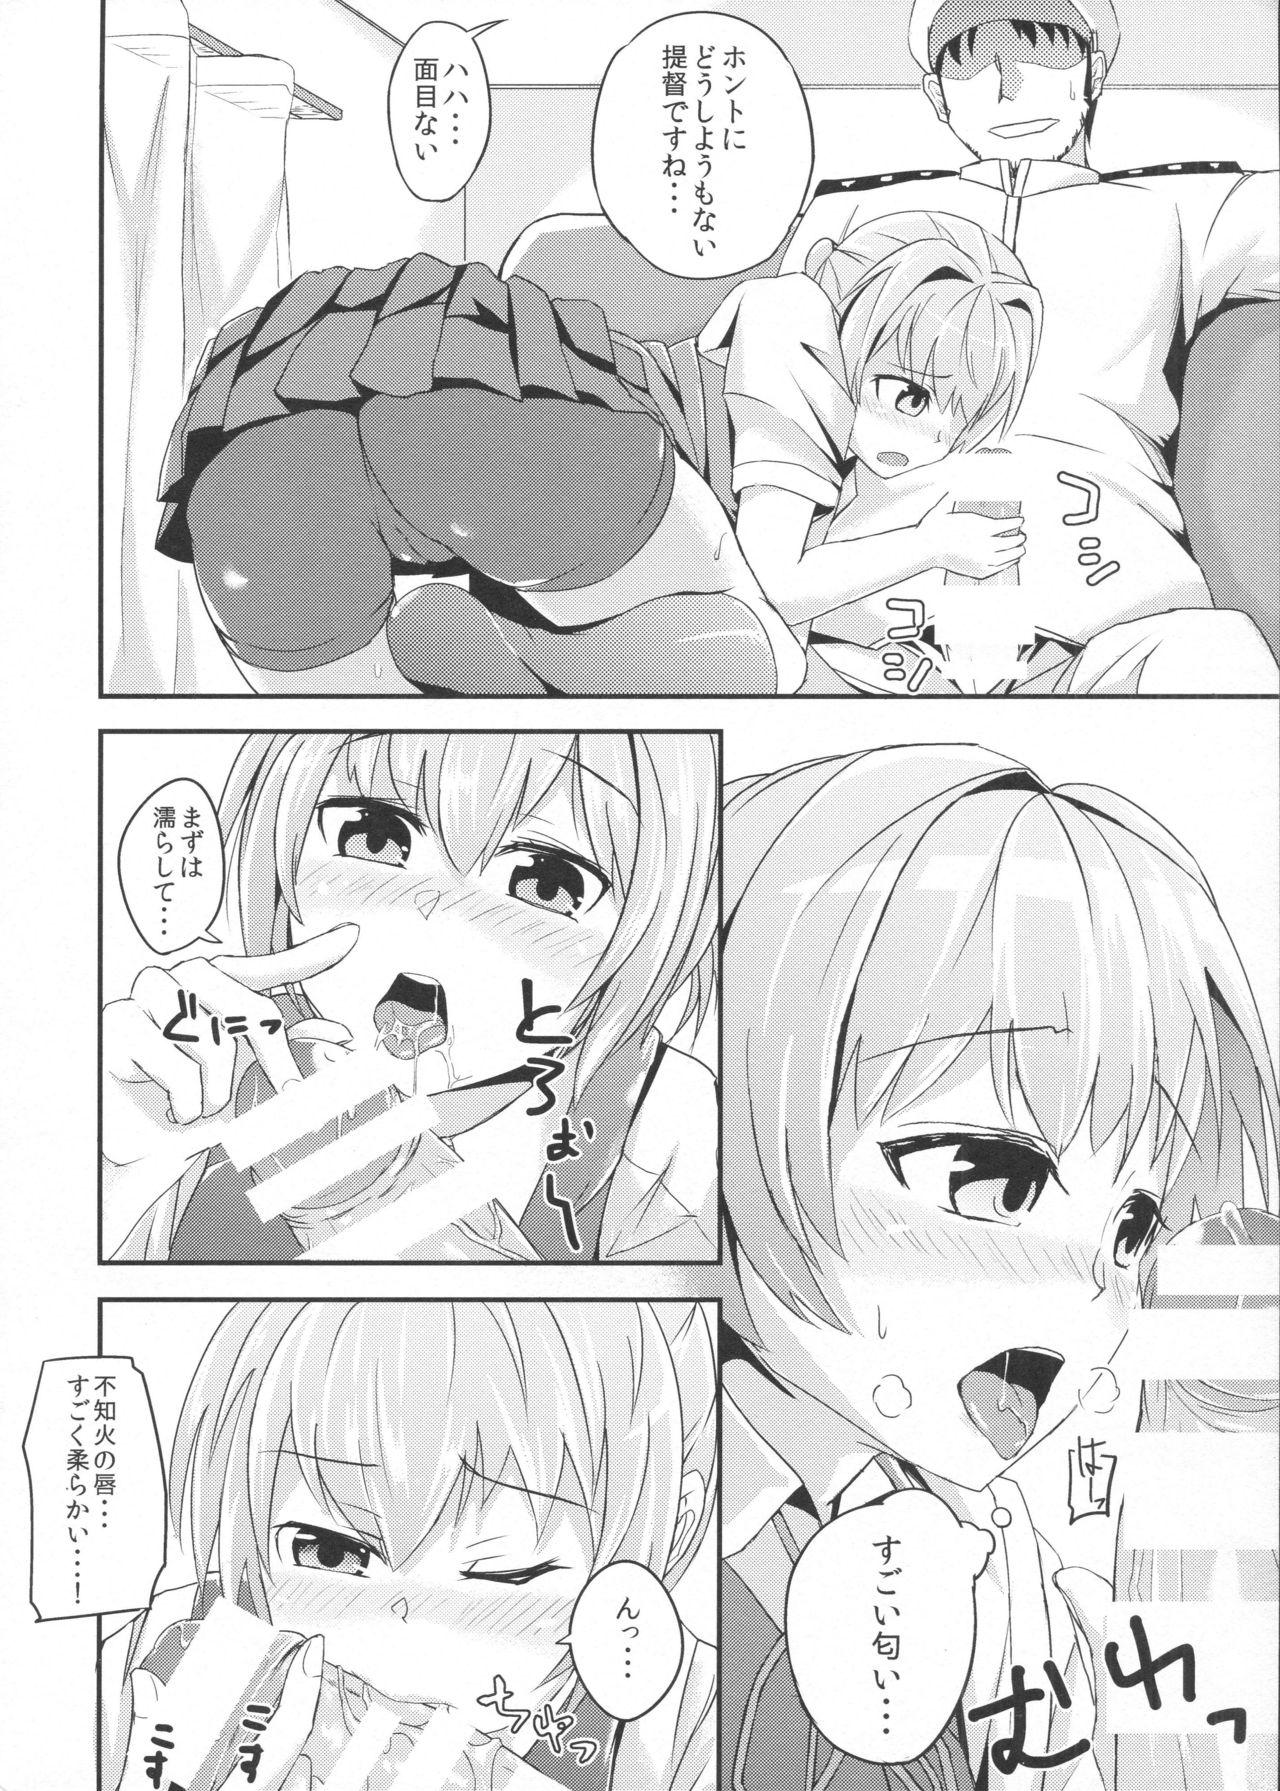 Farting Tsun to Dere Nui - Kantai collection Ex Girlfriend - Page 9